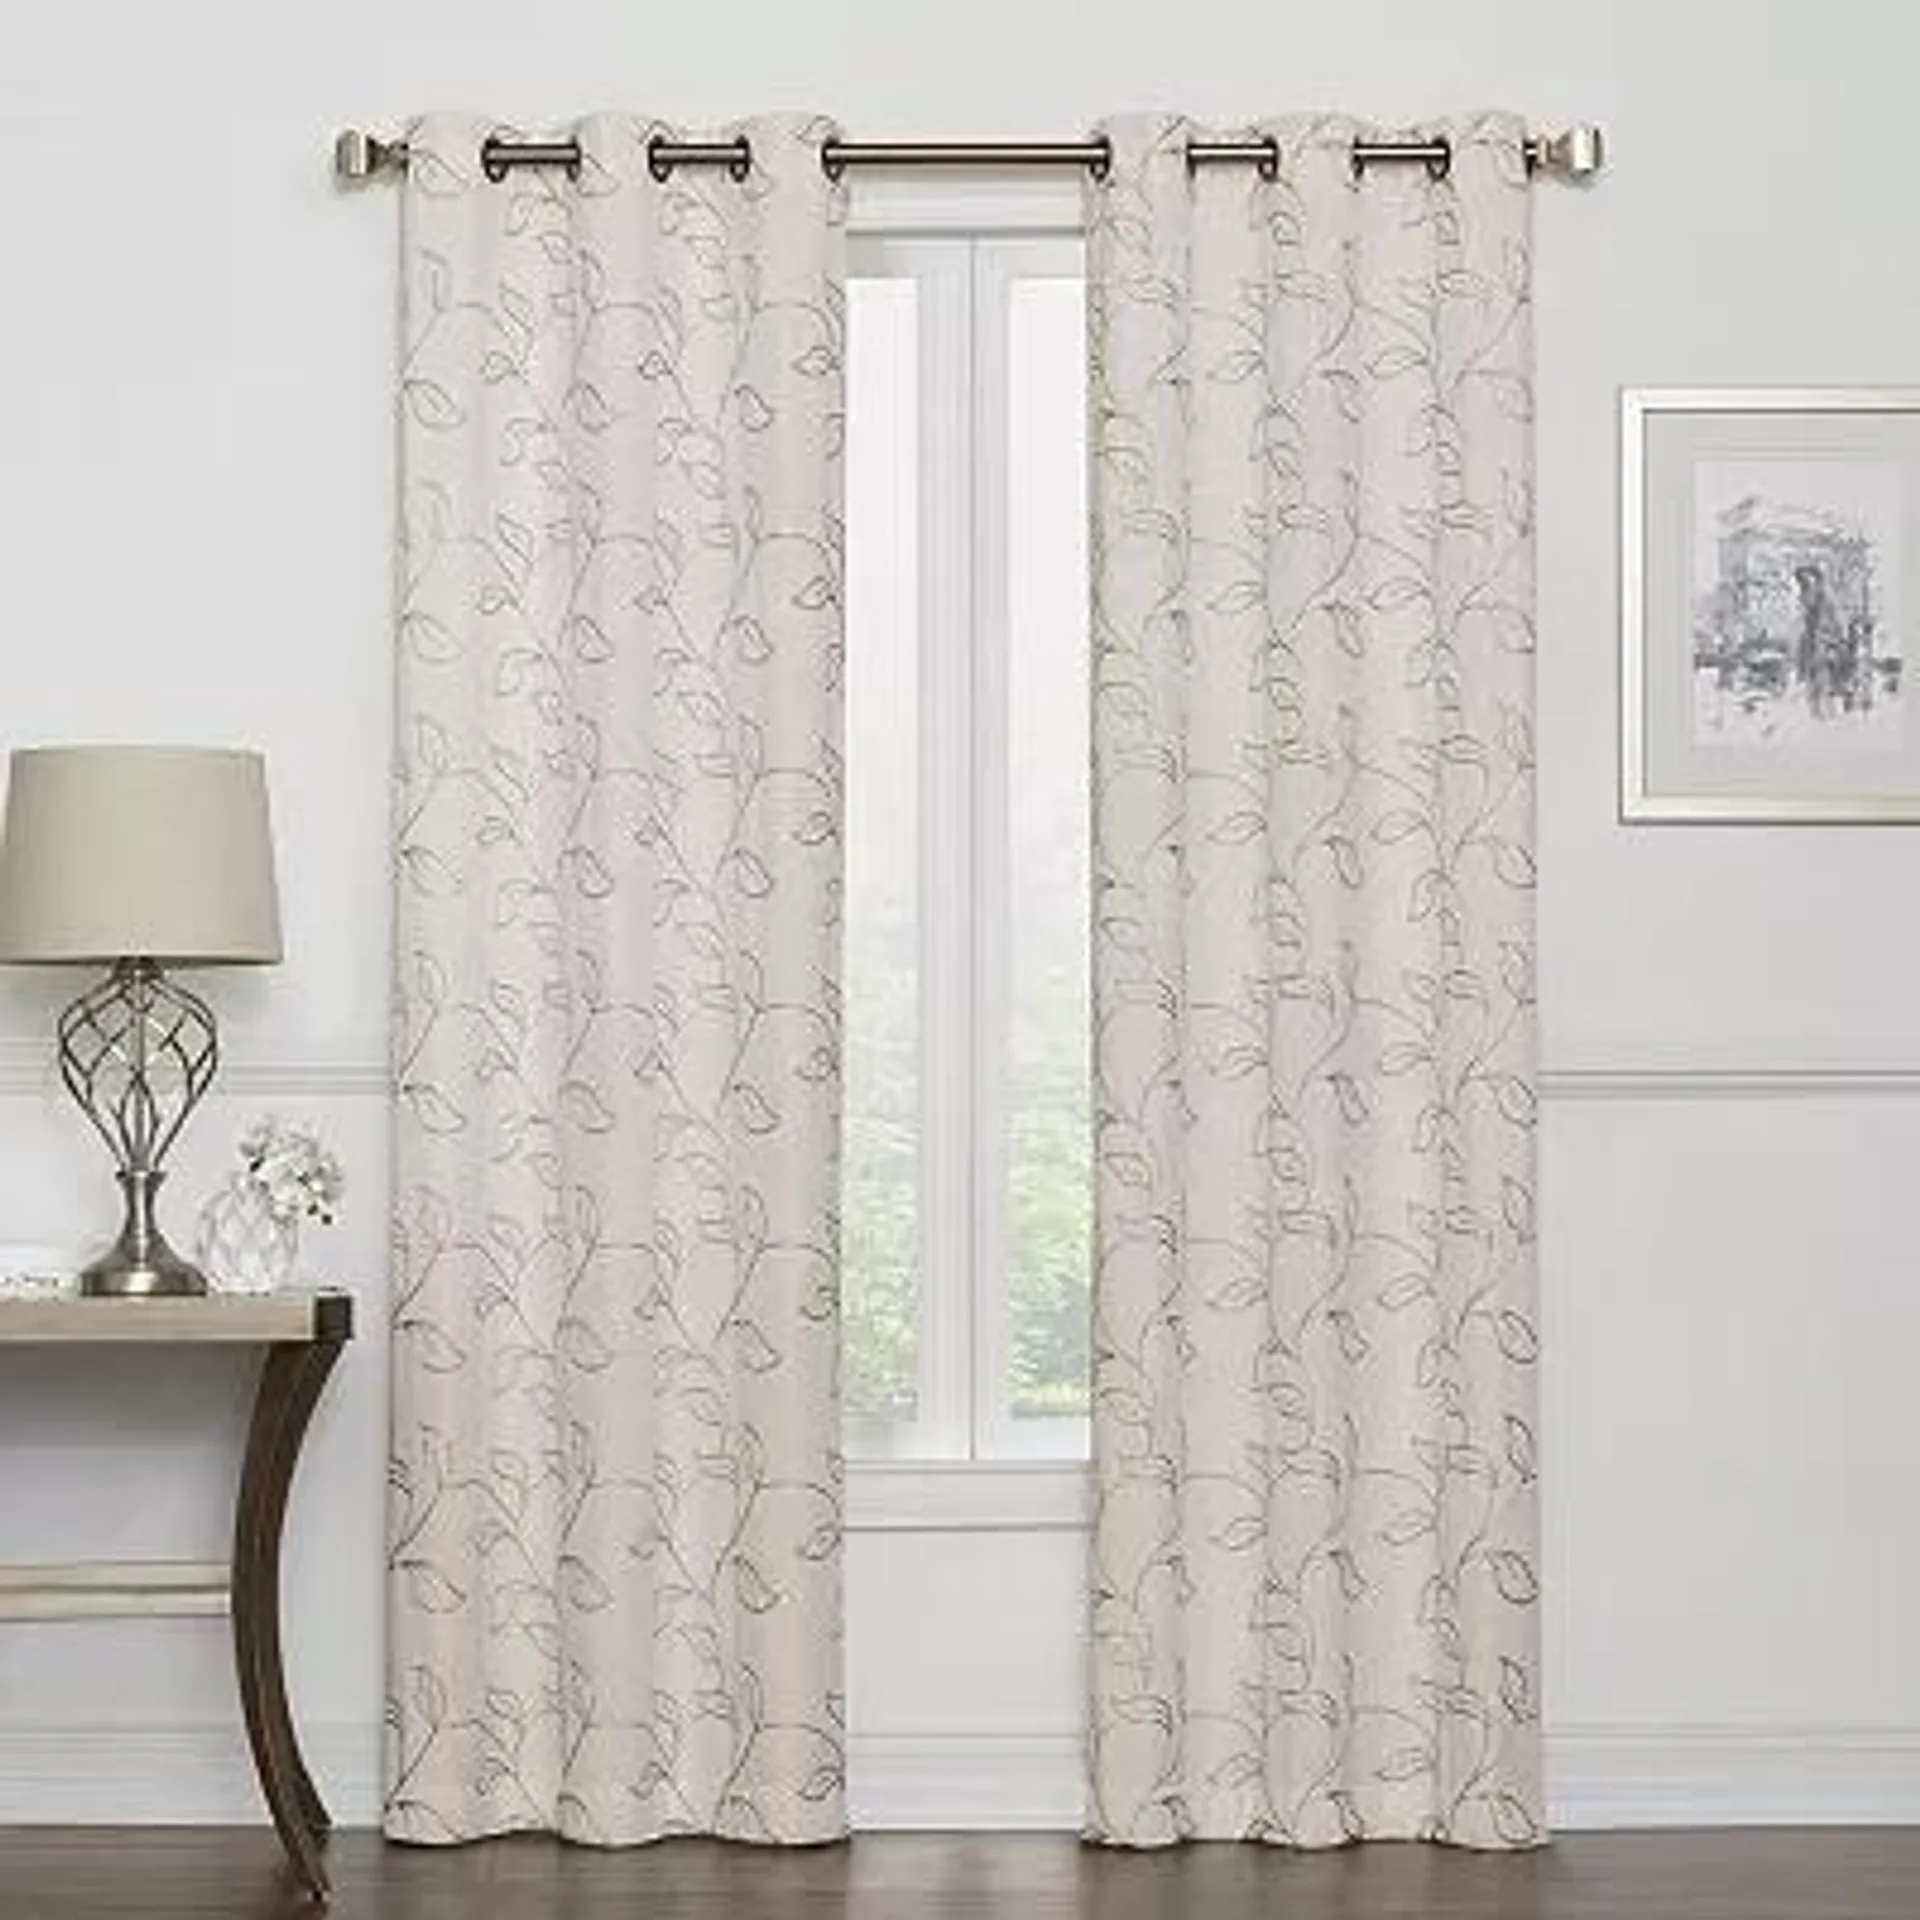 Sonoma Goods For Life® 2-pack Leaf Embroidery Window Curtains